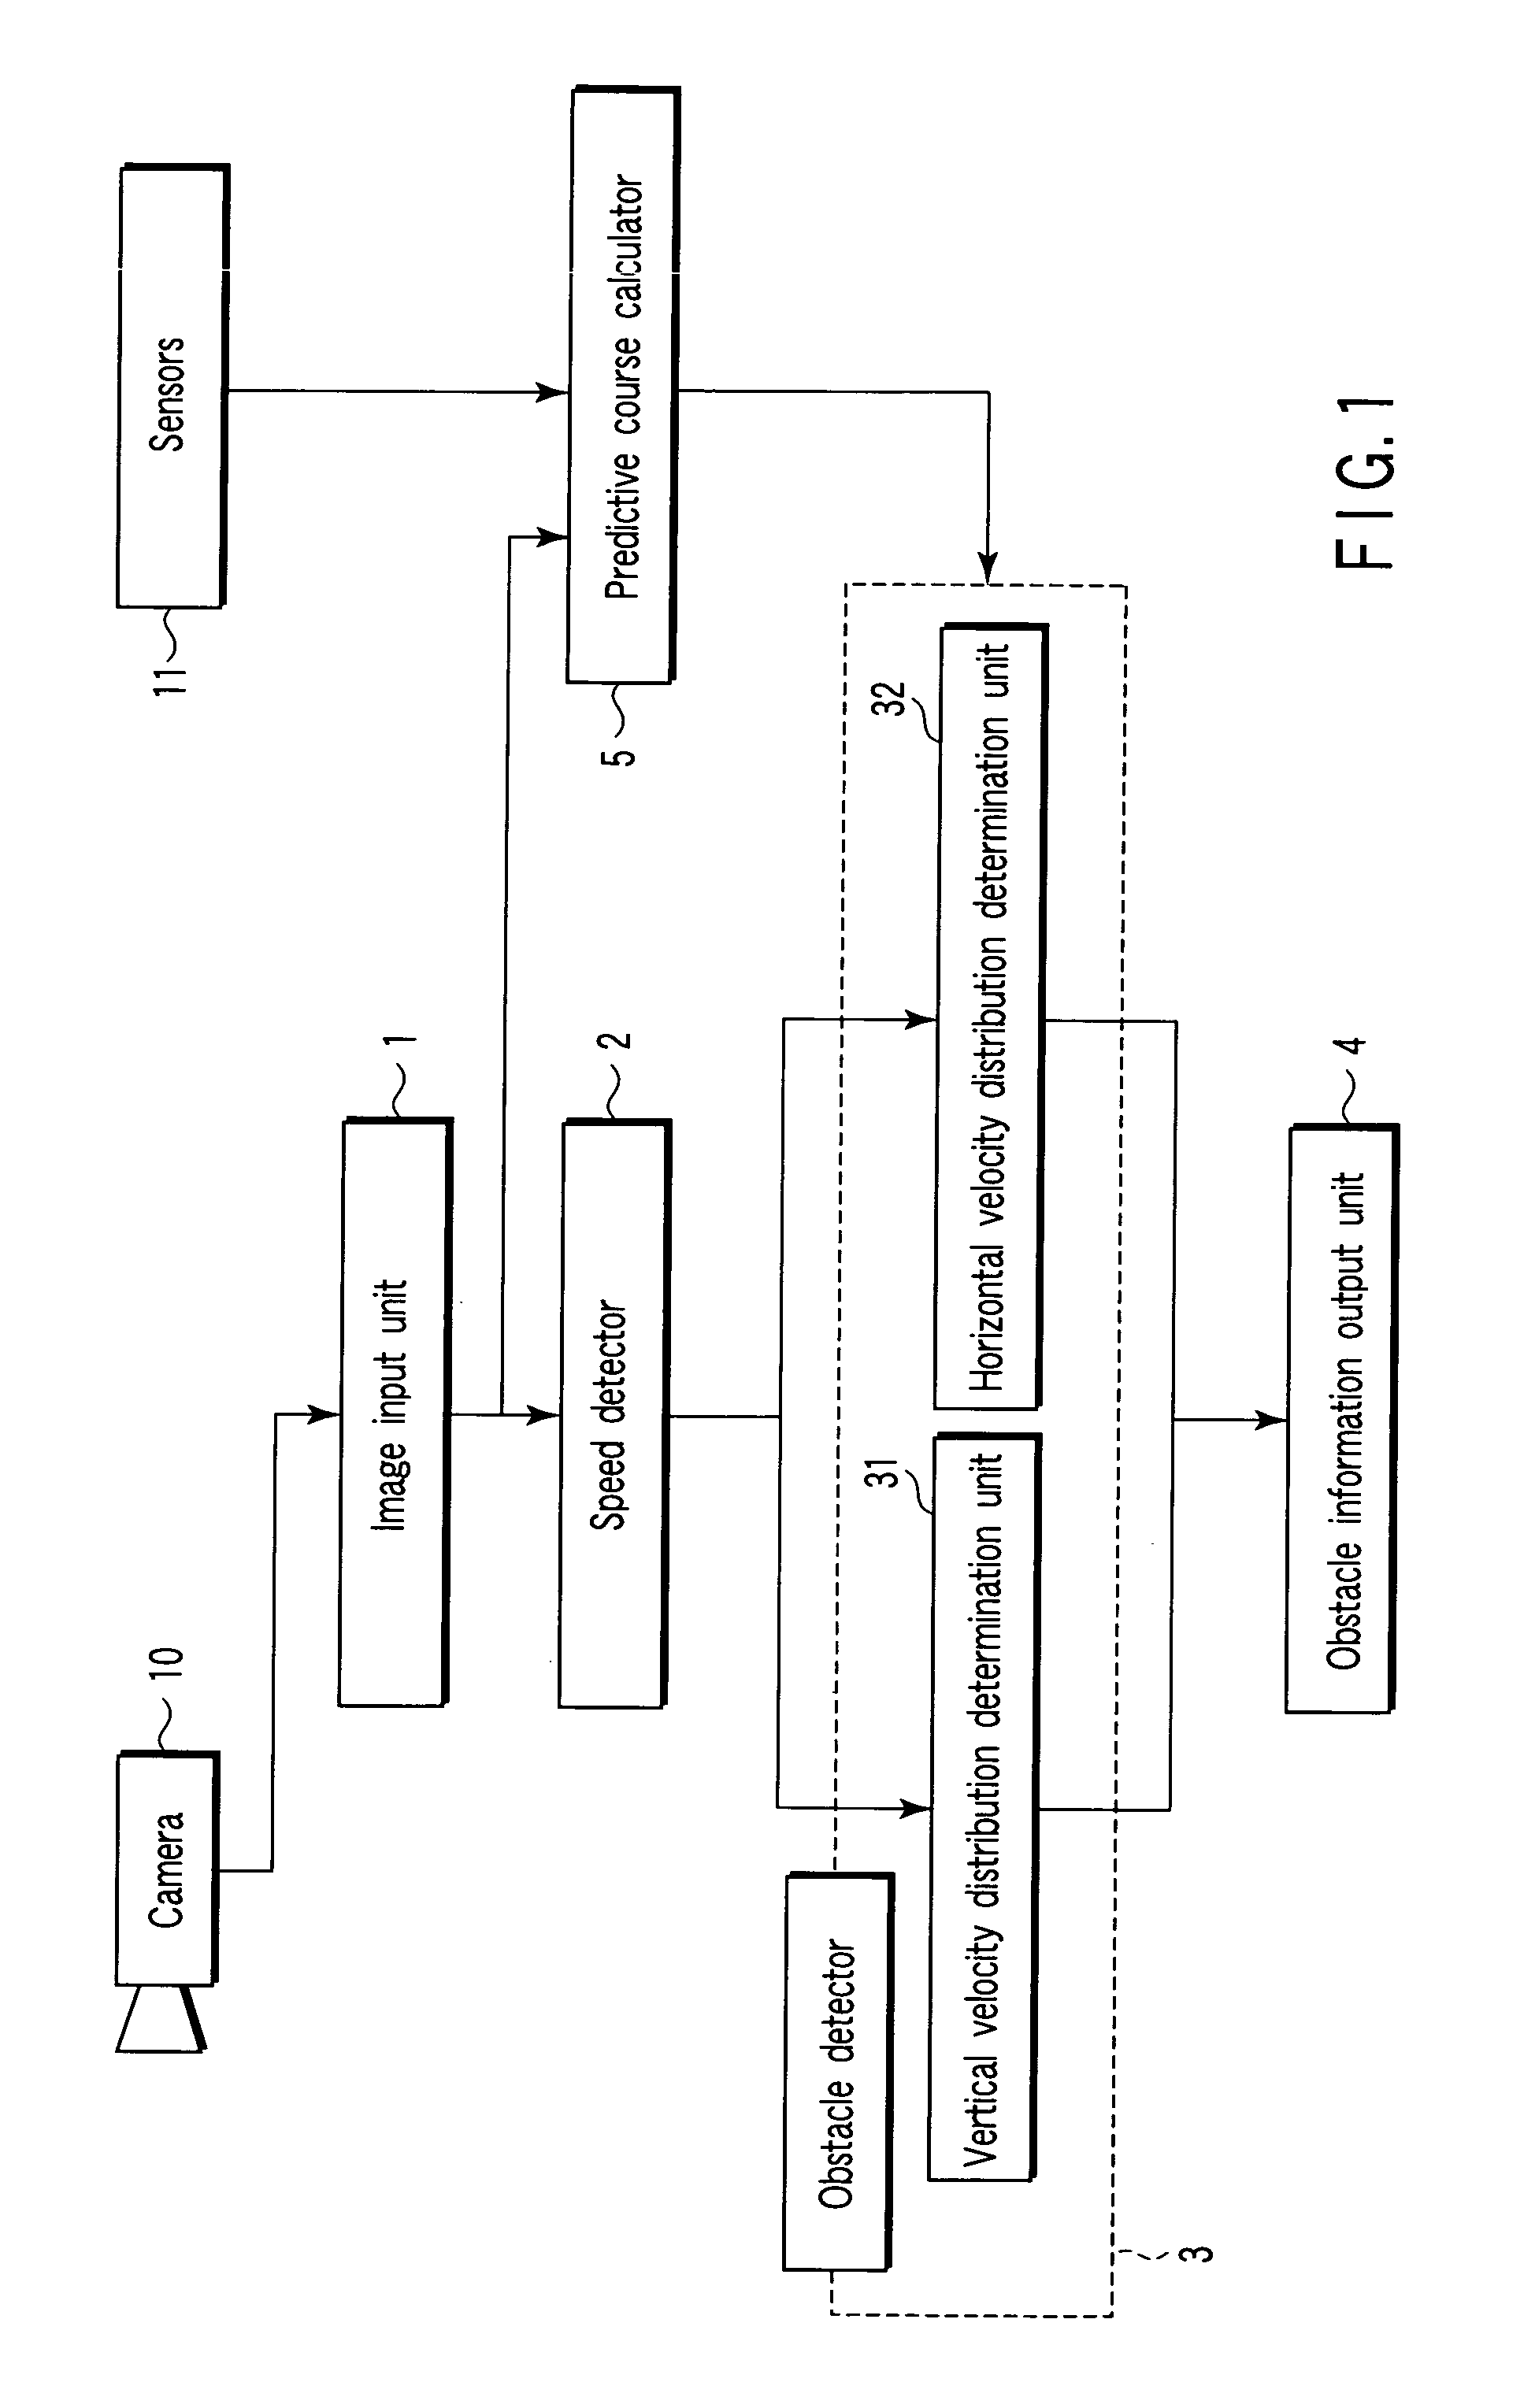 Obstacle detection apparatus and a method therefor